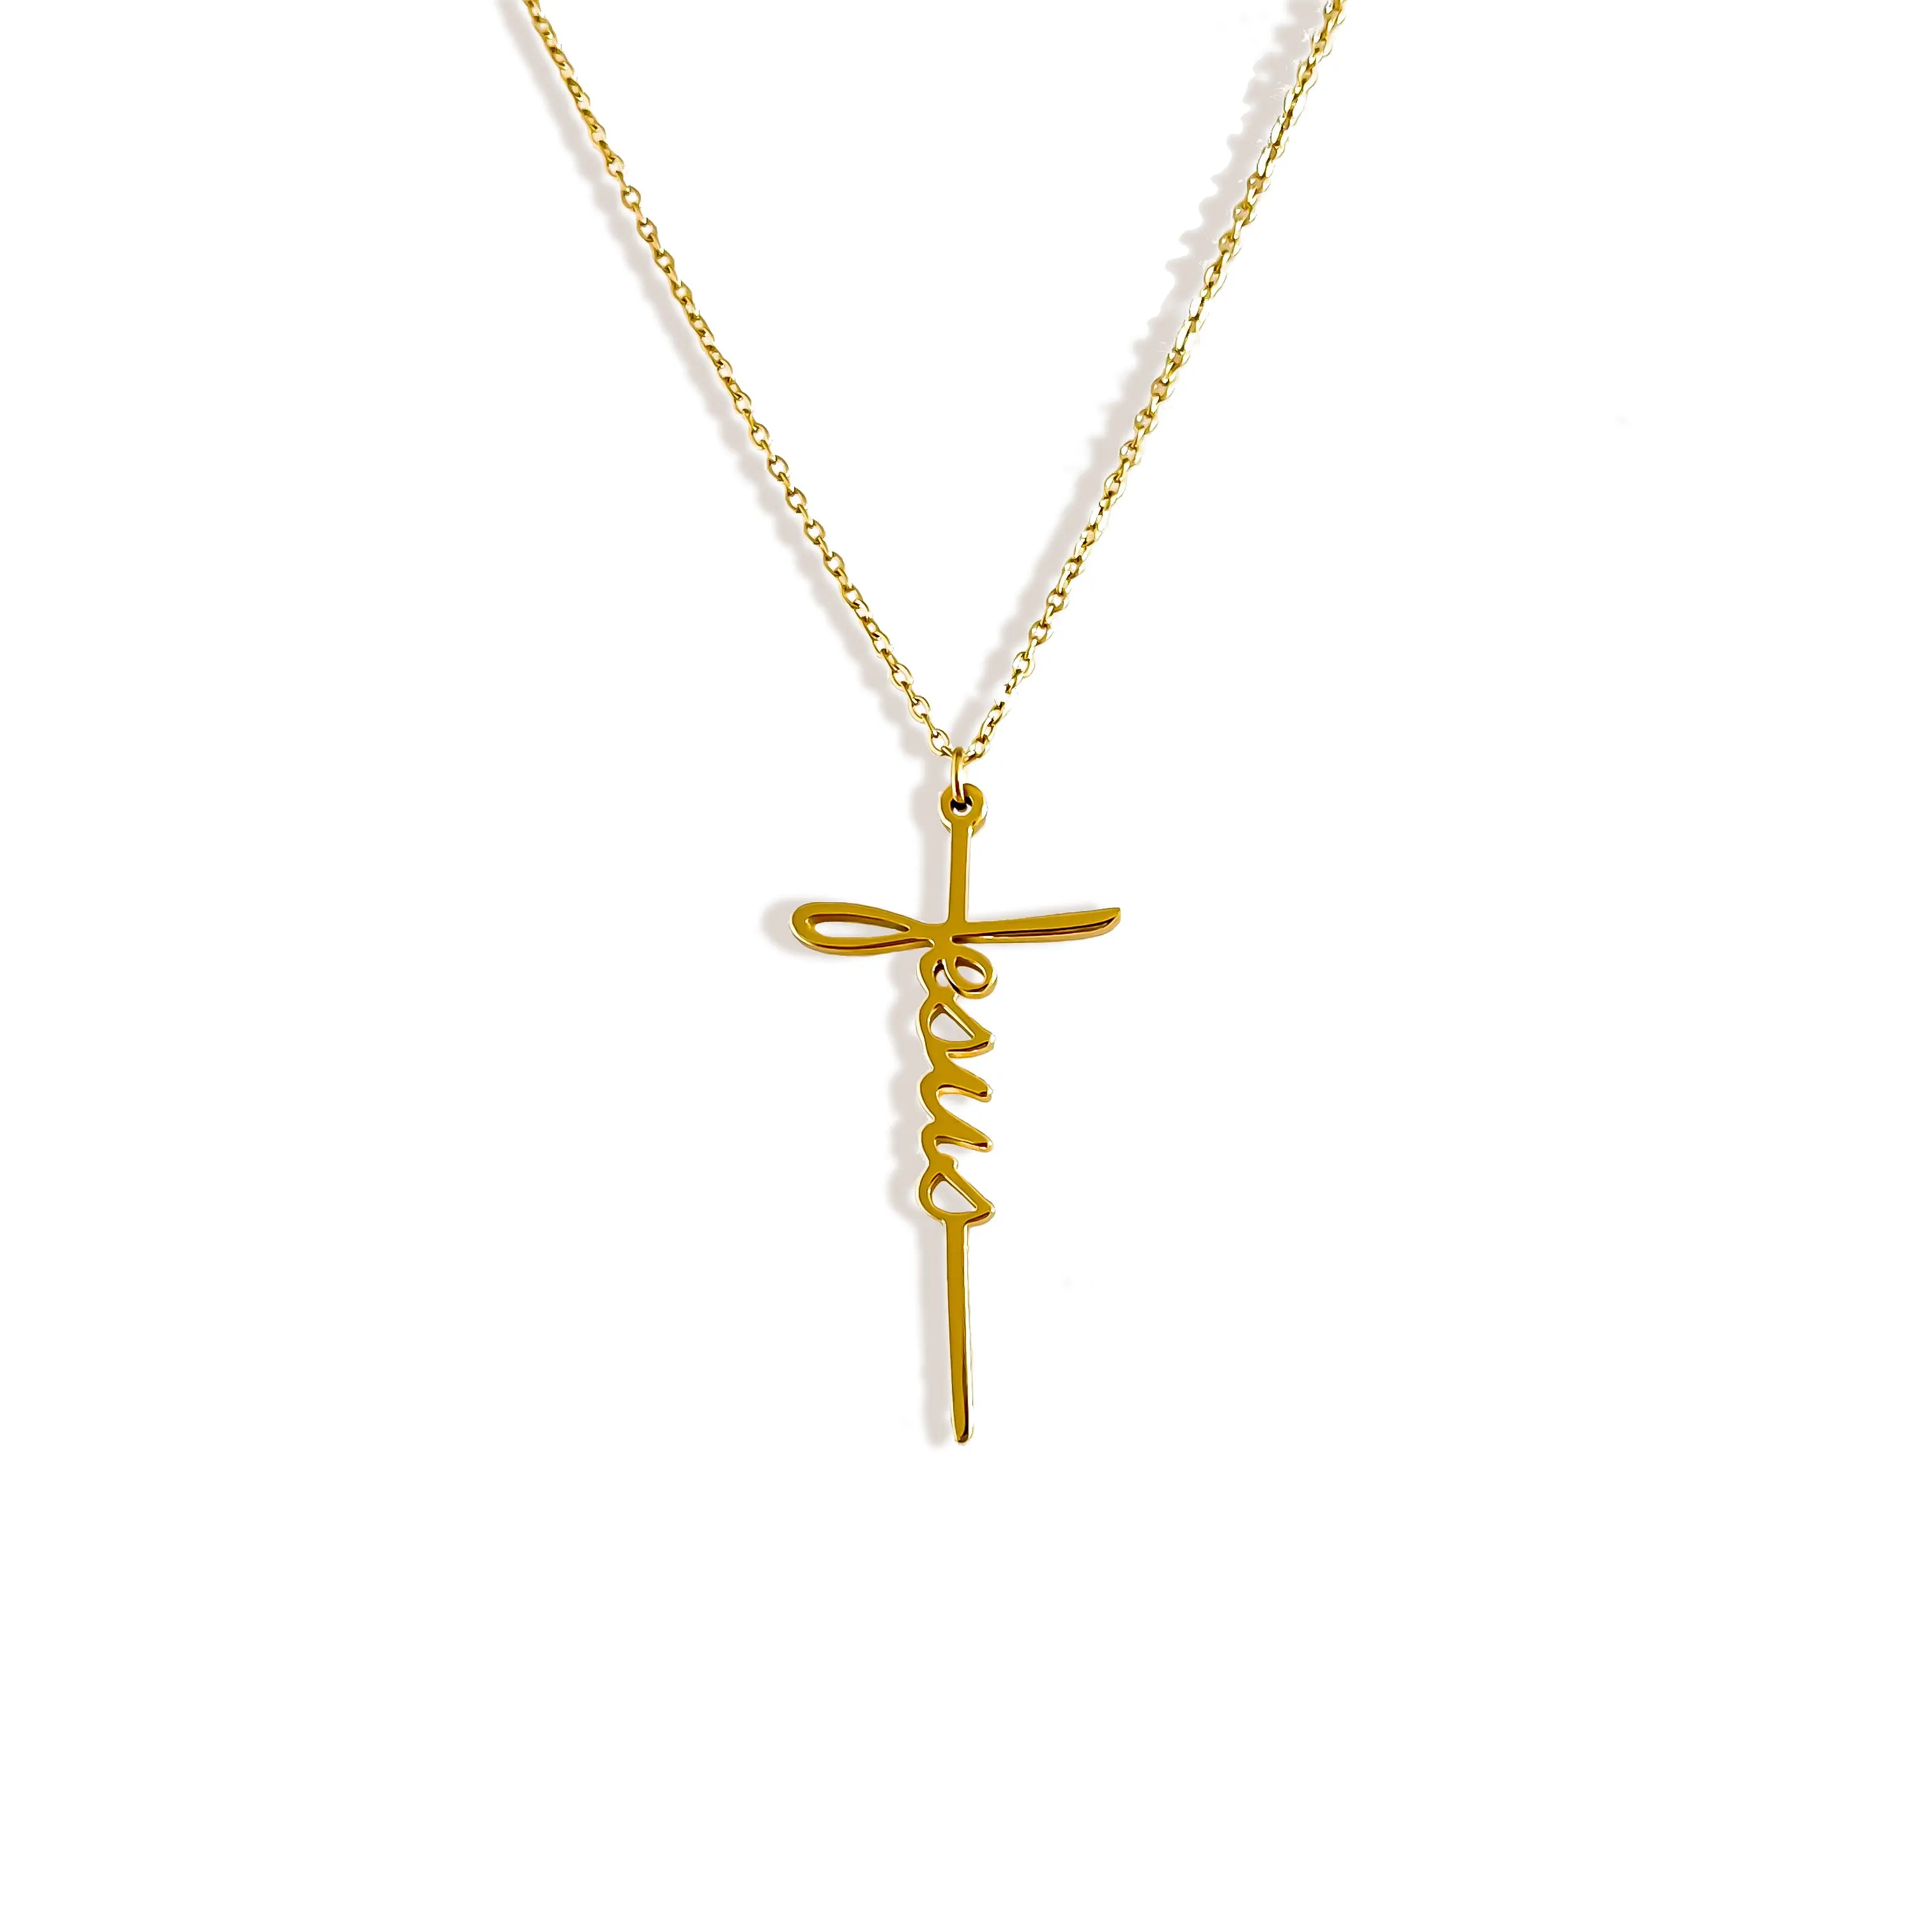 AIZL Enlightenment Energy Jewelry stainless steel pvd cross pendant necklaces 18K Gold plated custom name letter Jesus necklace